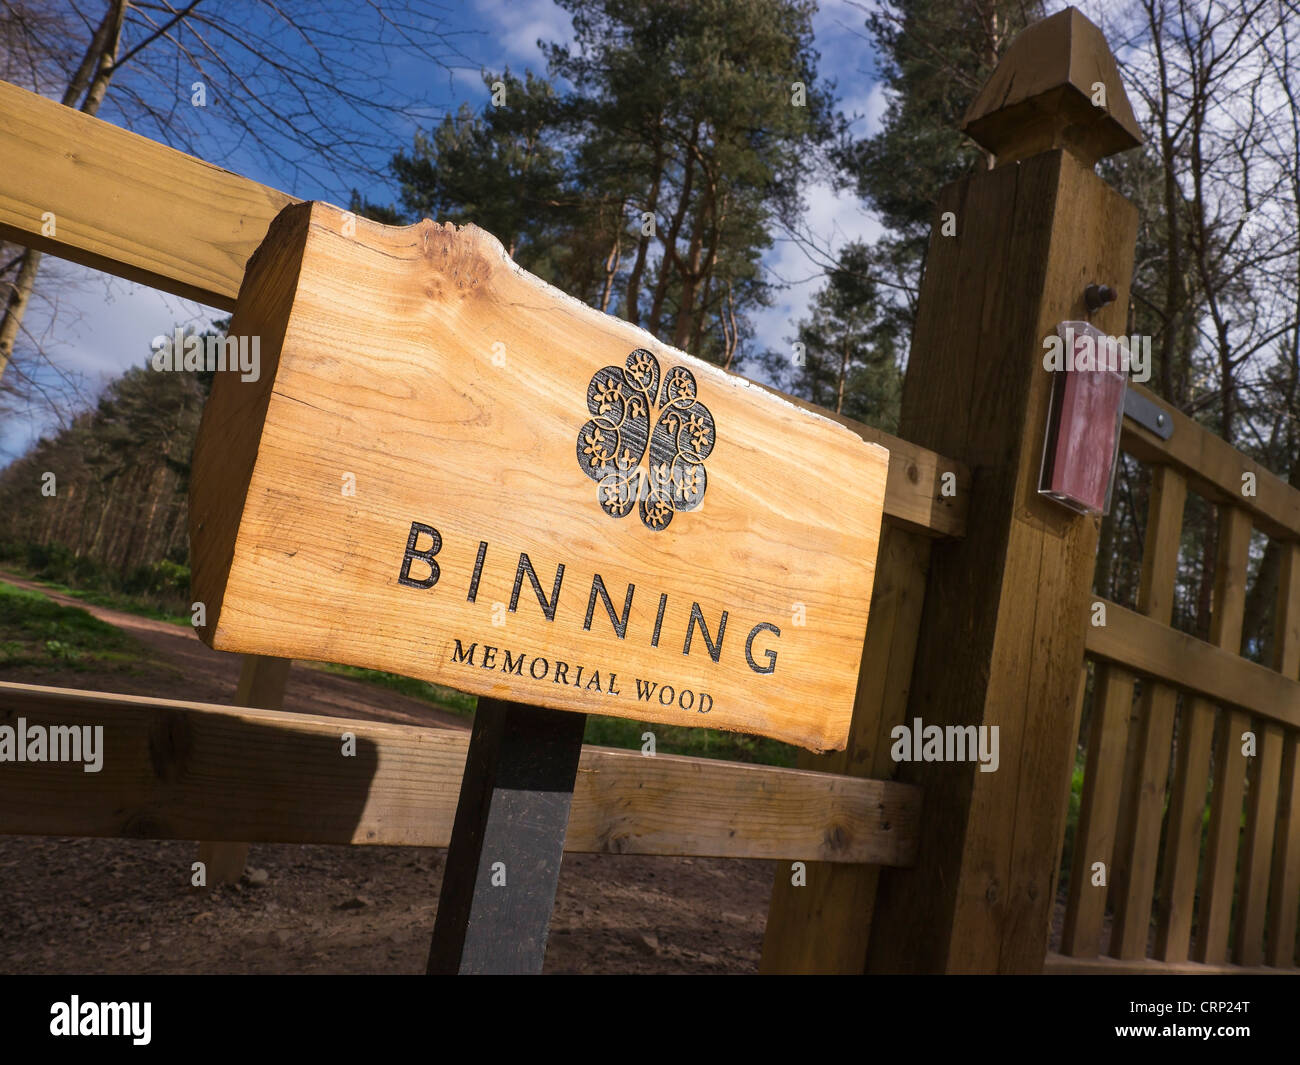 A wooden sign at the entrance gate to the Binning Memorial Woodland burial site, East Lothian, Scotland. Stock Photo